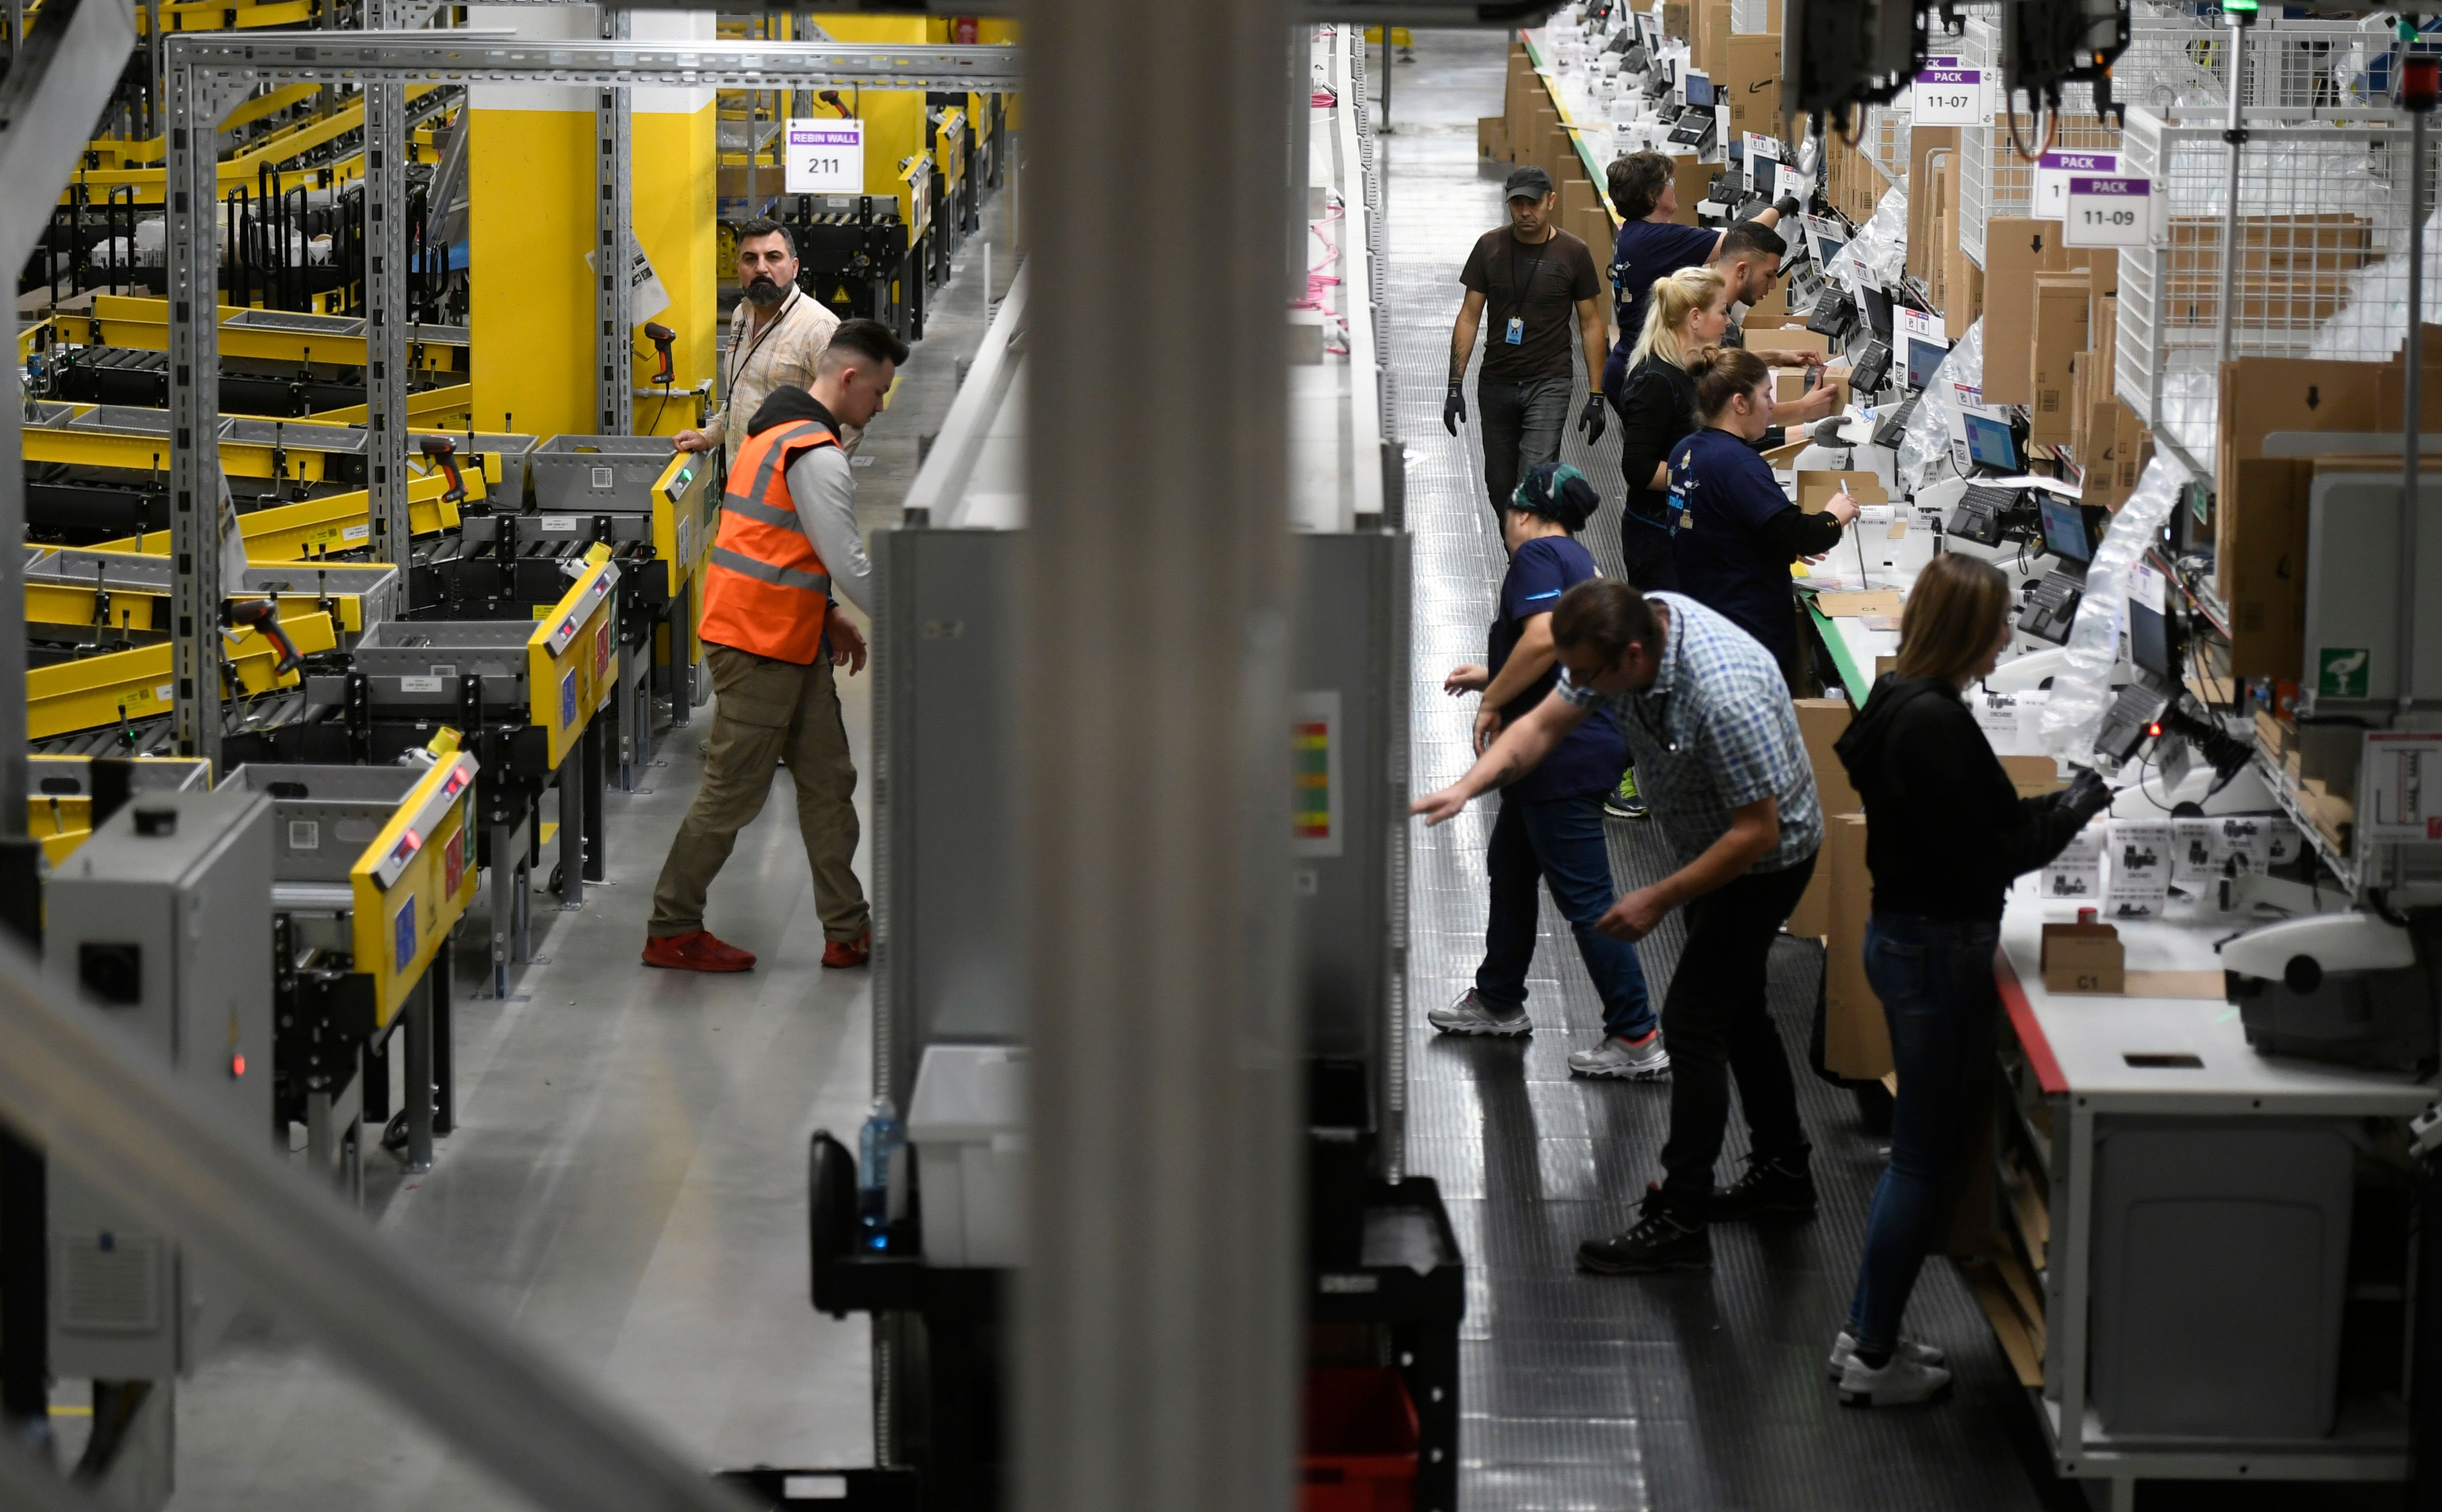 The picture shows employees working at the distribution center of US online retail giant Amazon in Moenchengladbach, on December 17, 2019. (INA FASSBENDER/AFP via Getty Images)